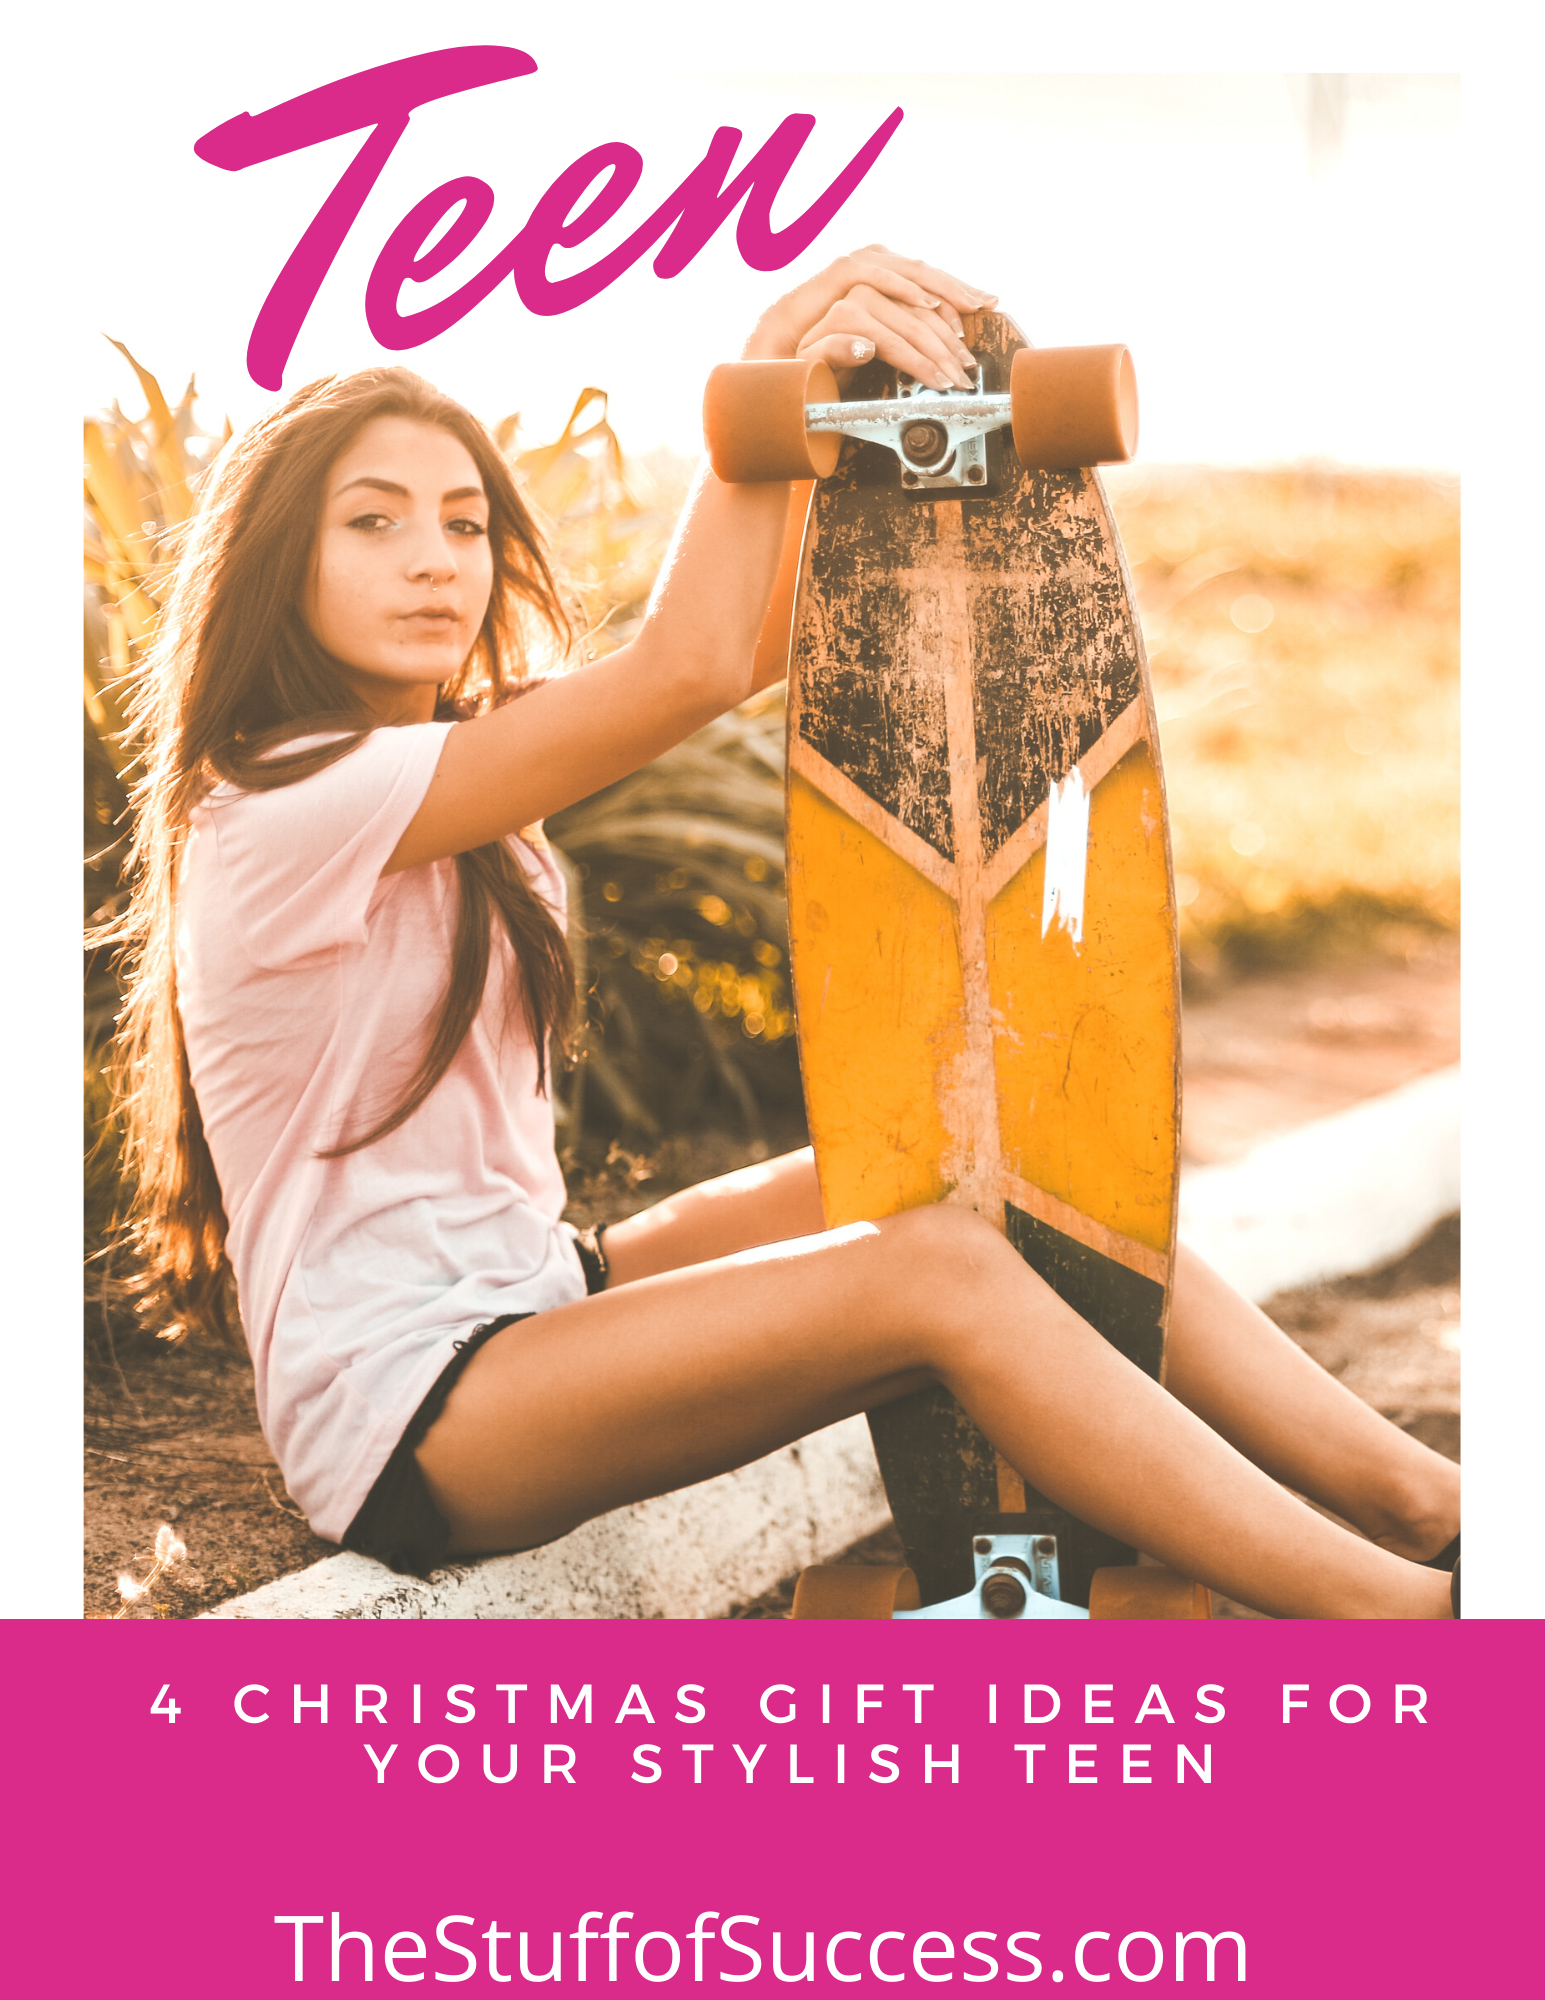 4 Christmas Gift Ideas for Your Stylish Teen